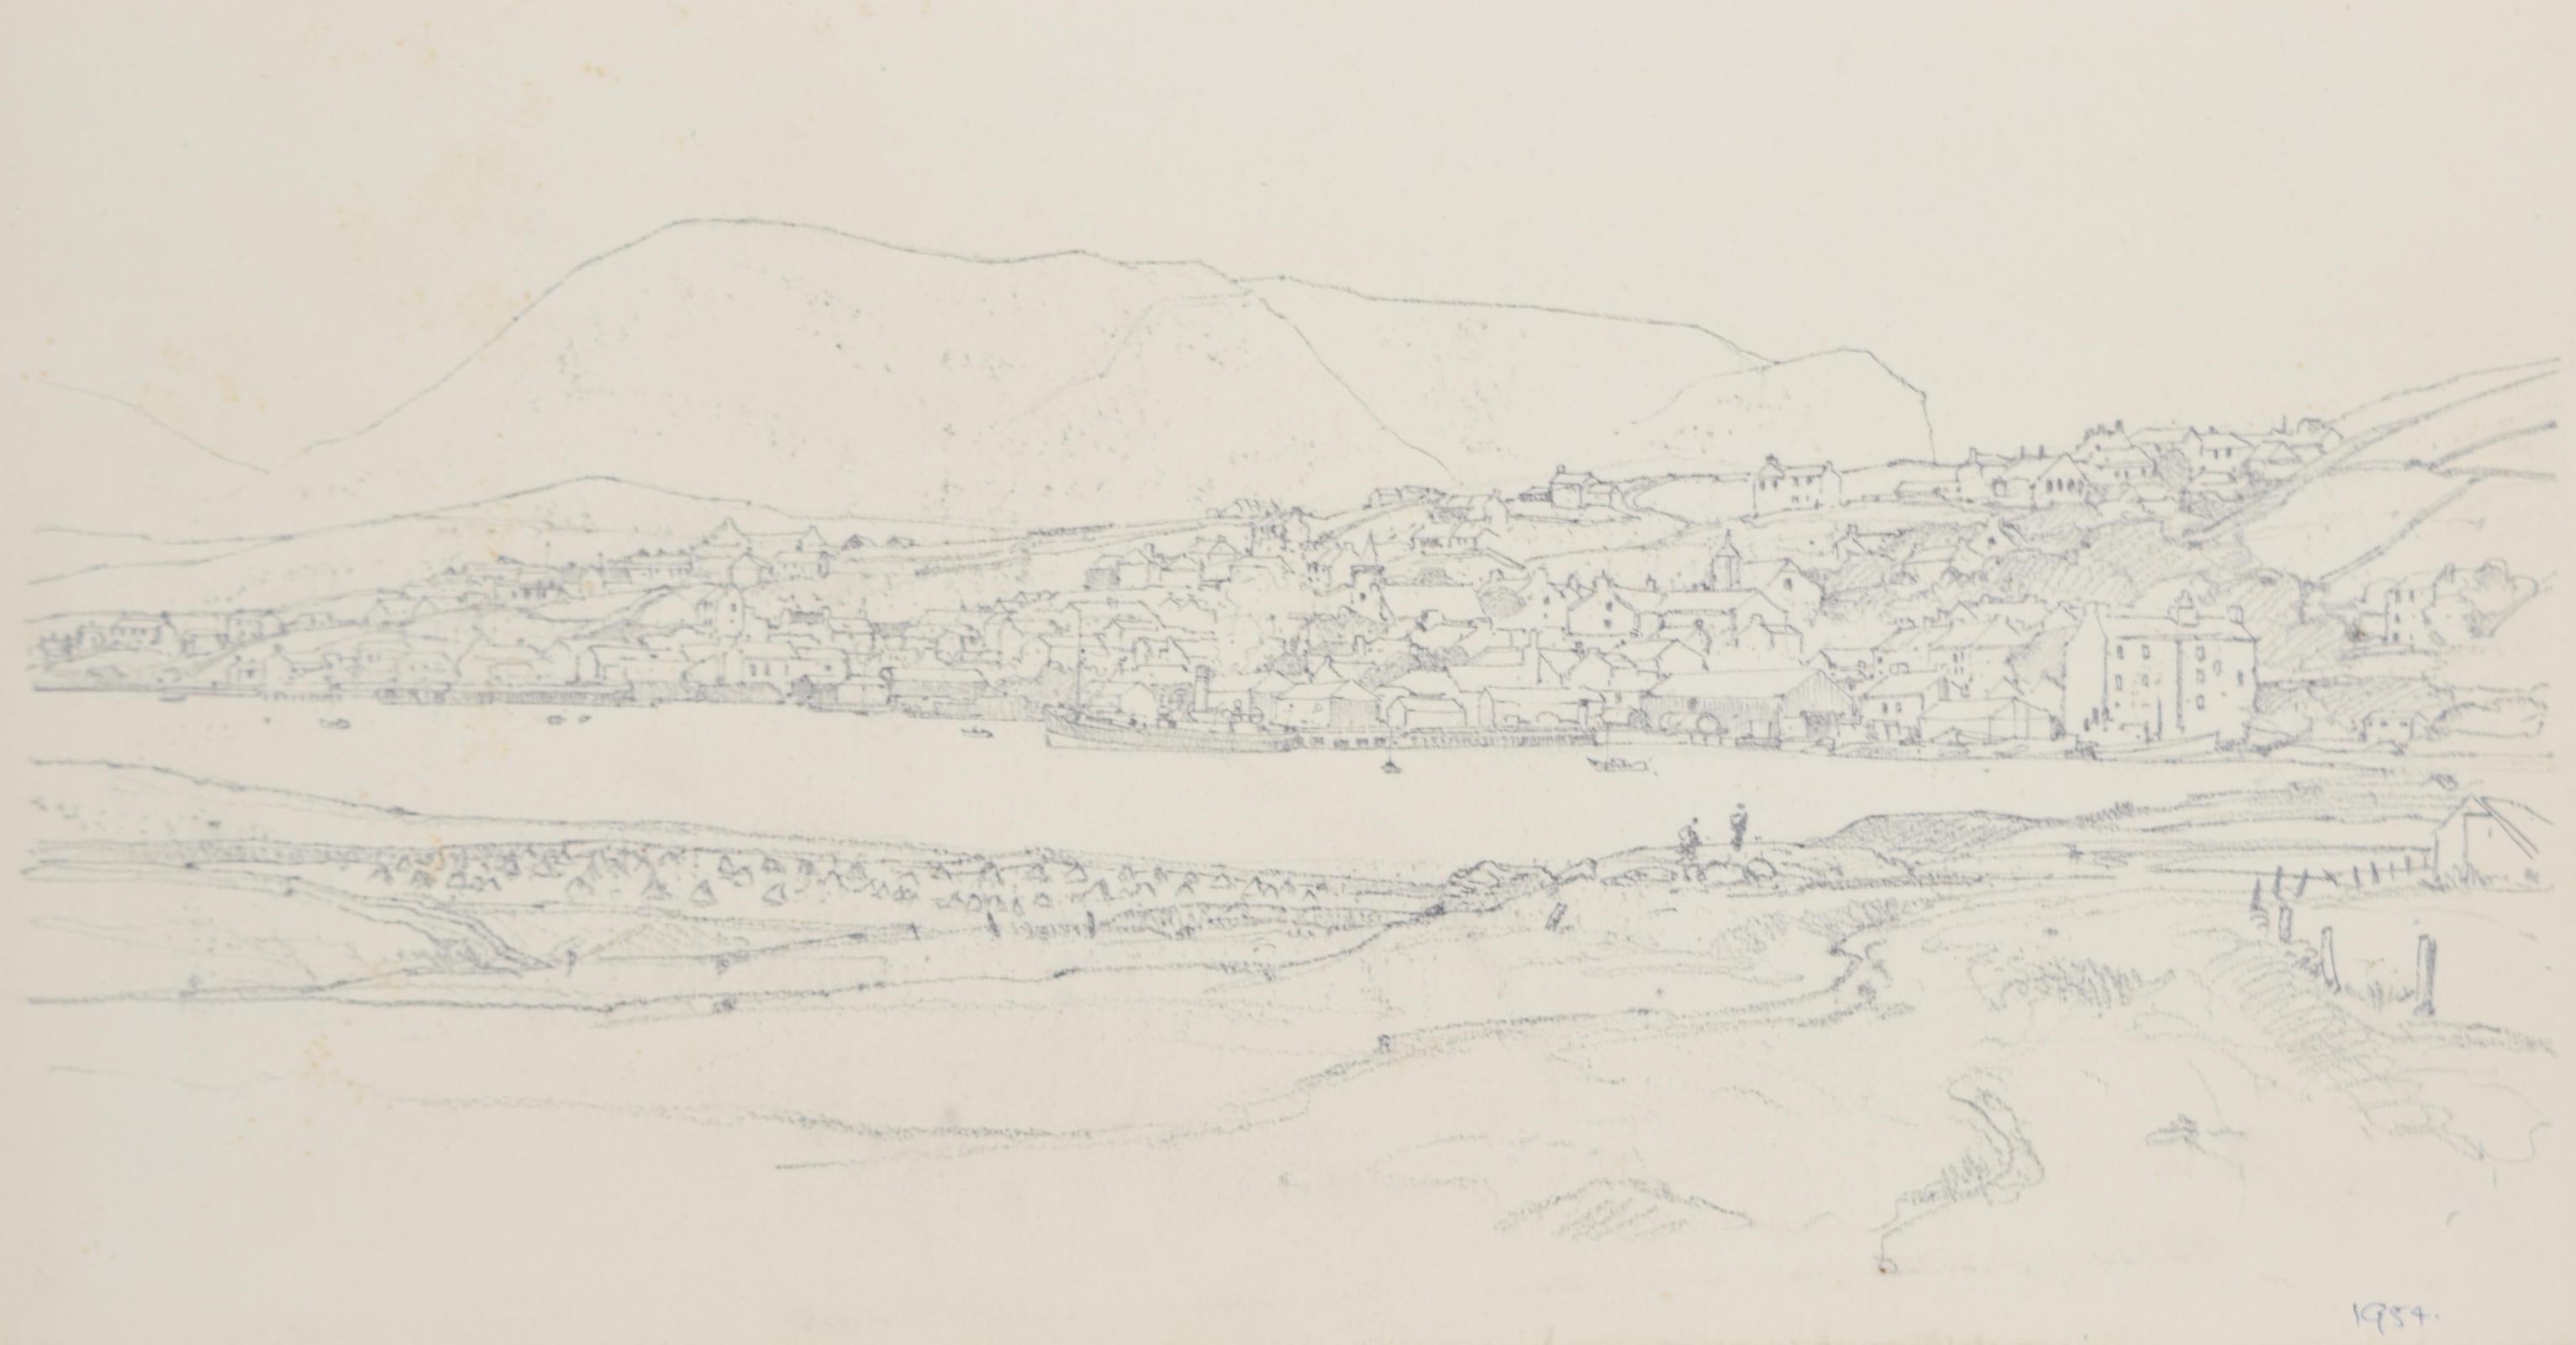 Stromness, Orkney drawing by Claude Muncaster